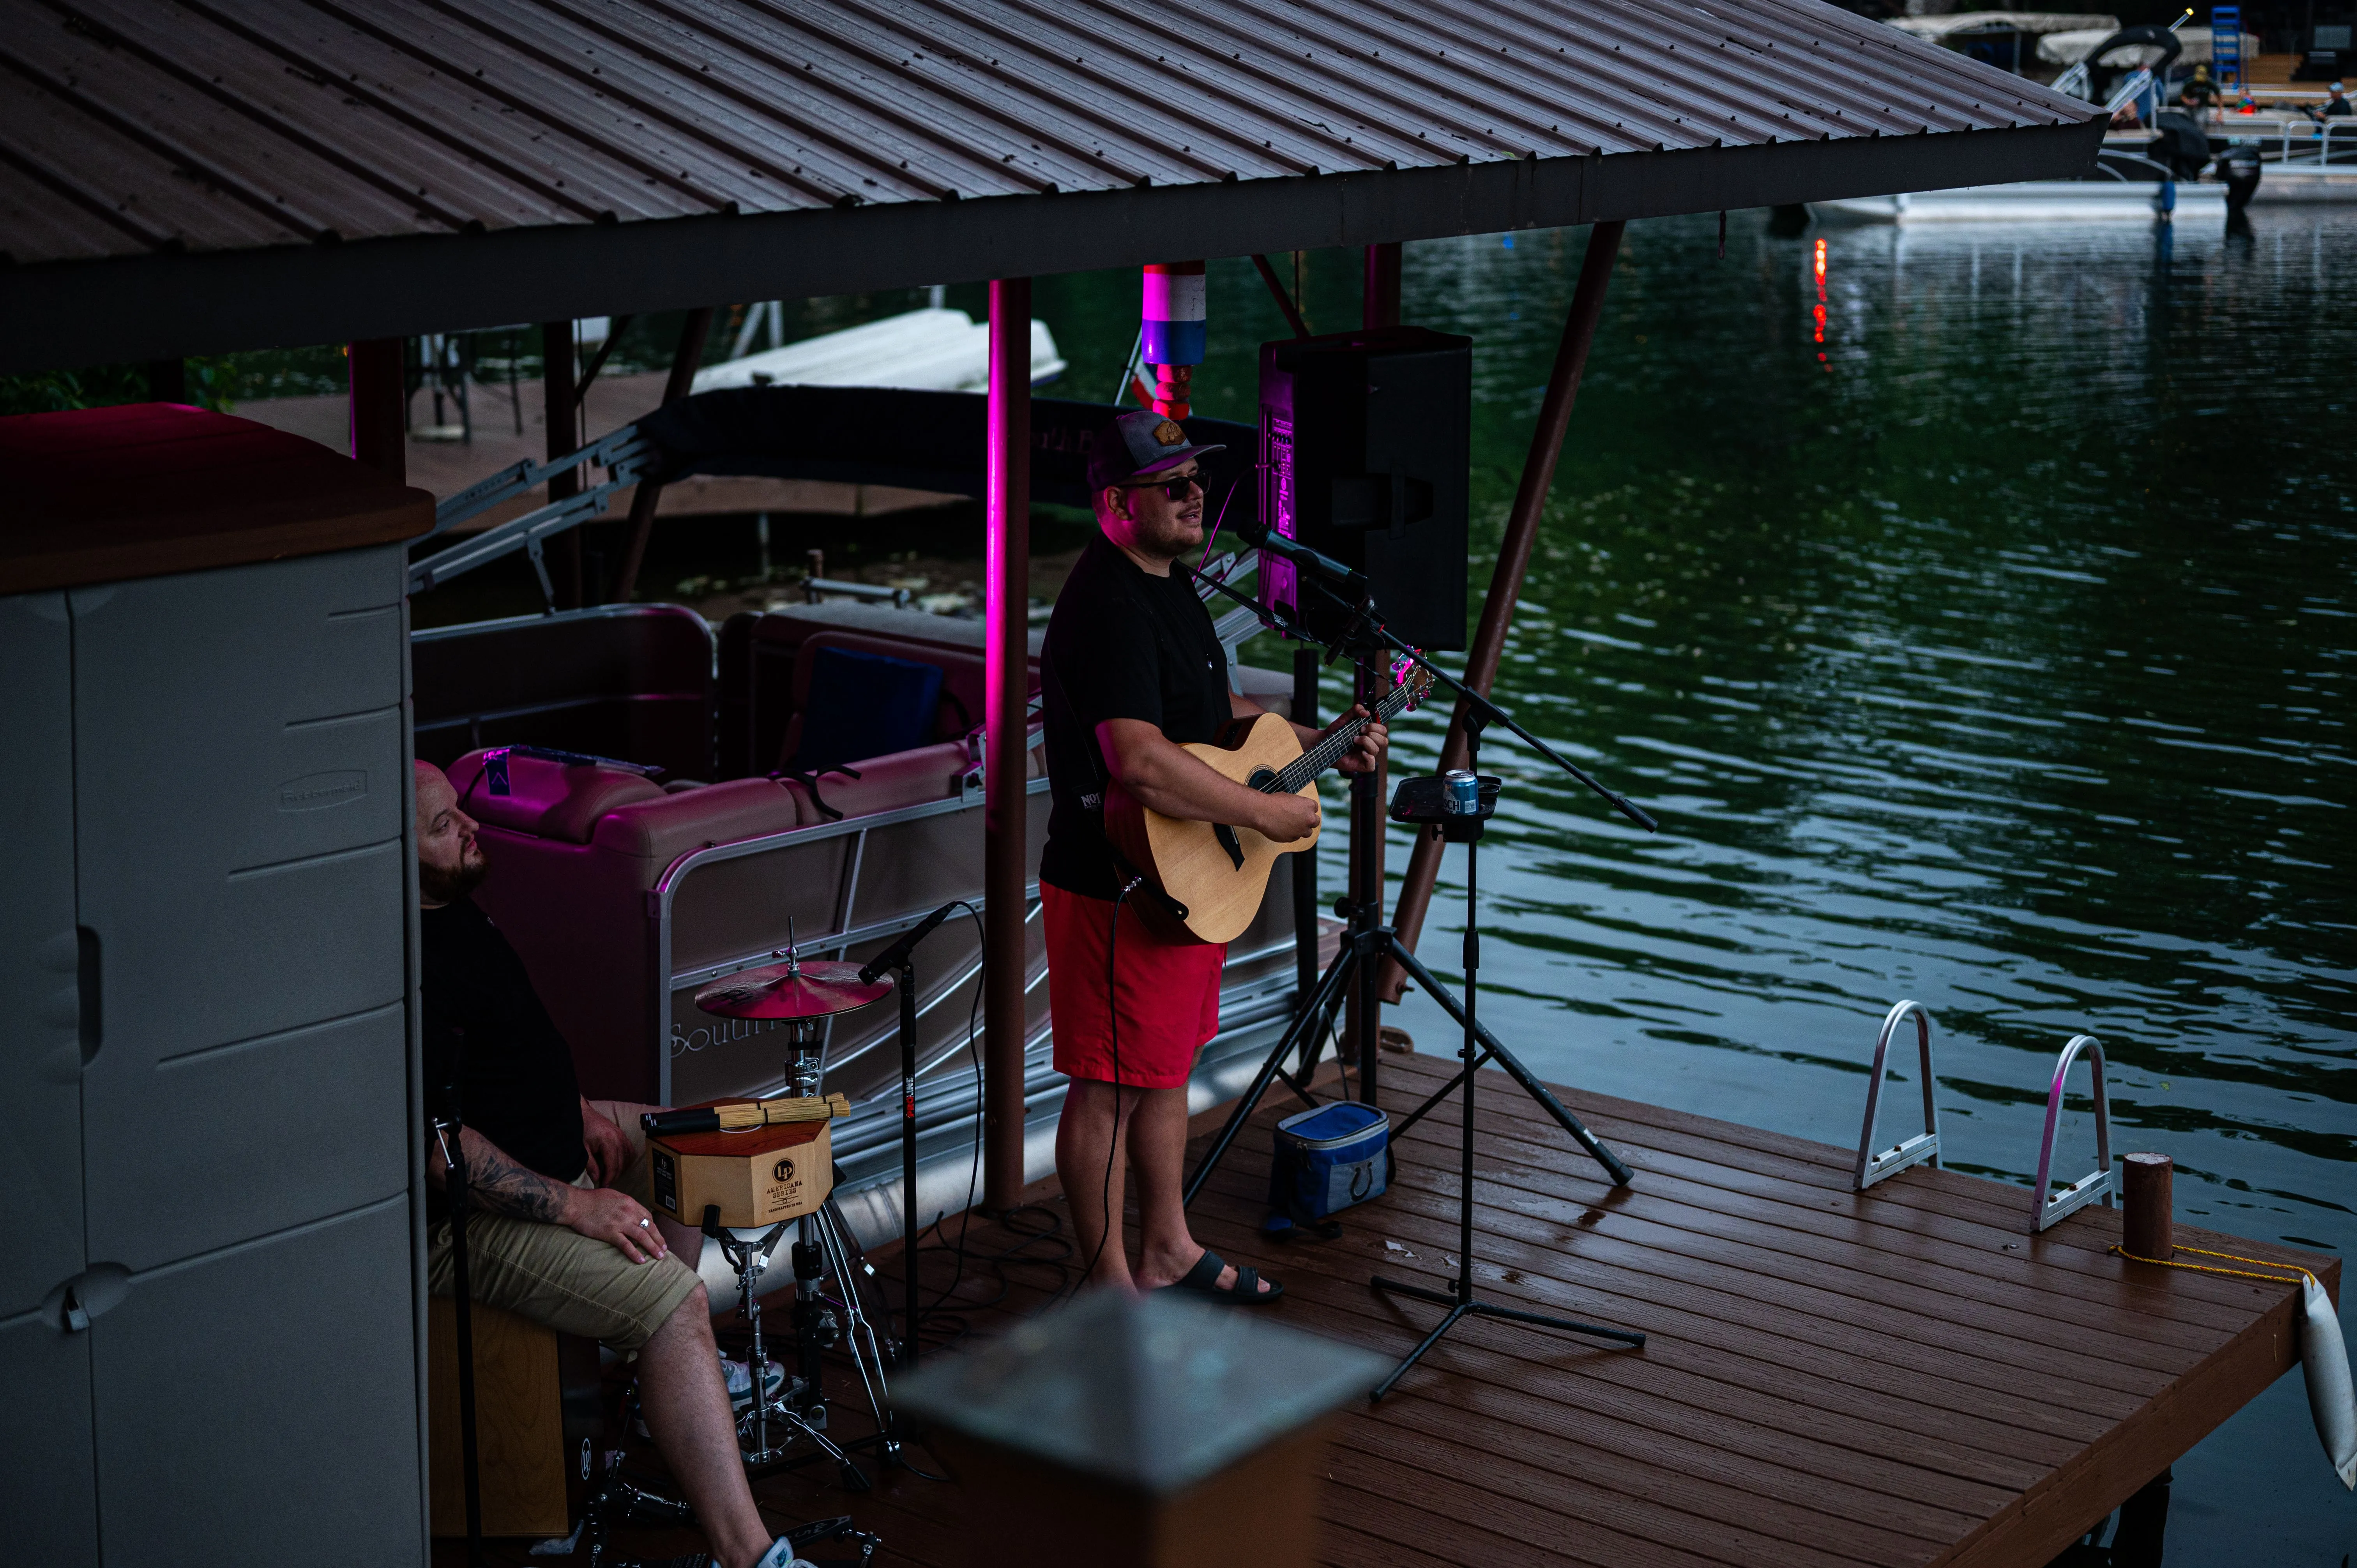 Musician playing guitar on a floating dock stage under a shelter at dusk.